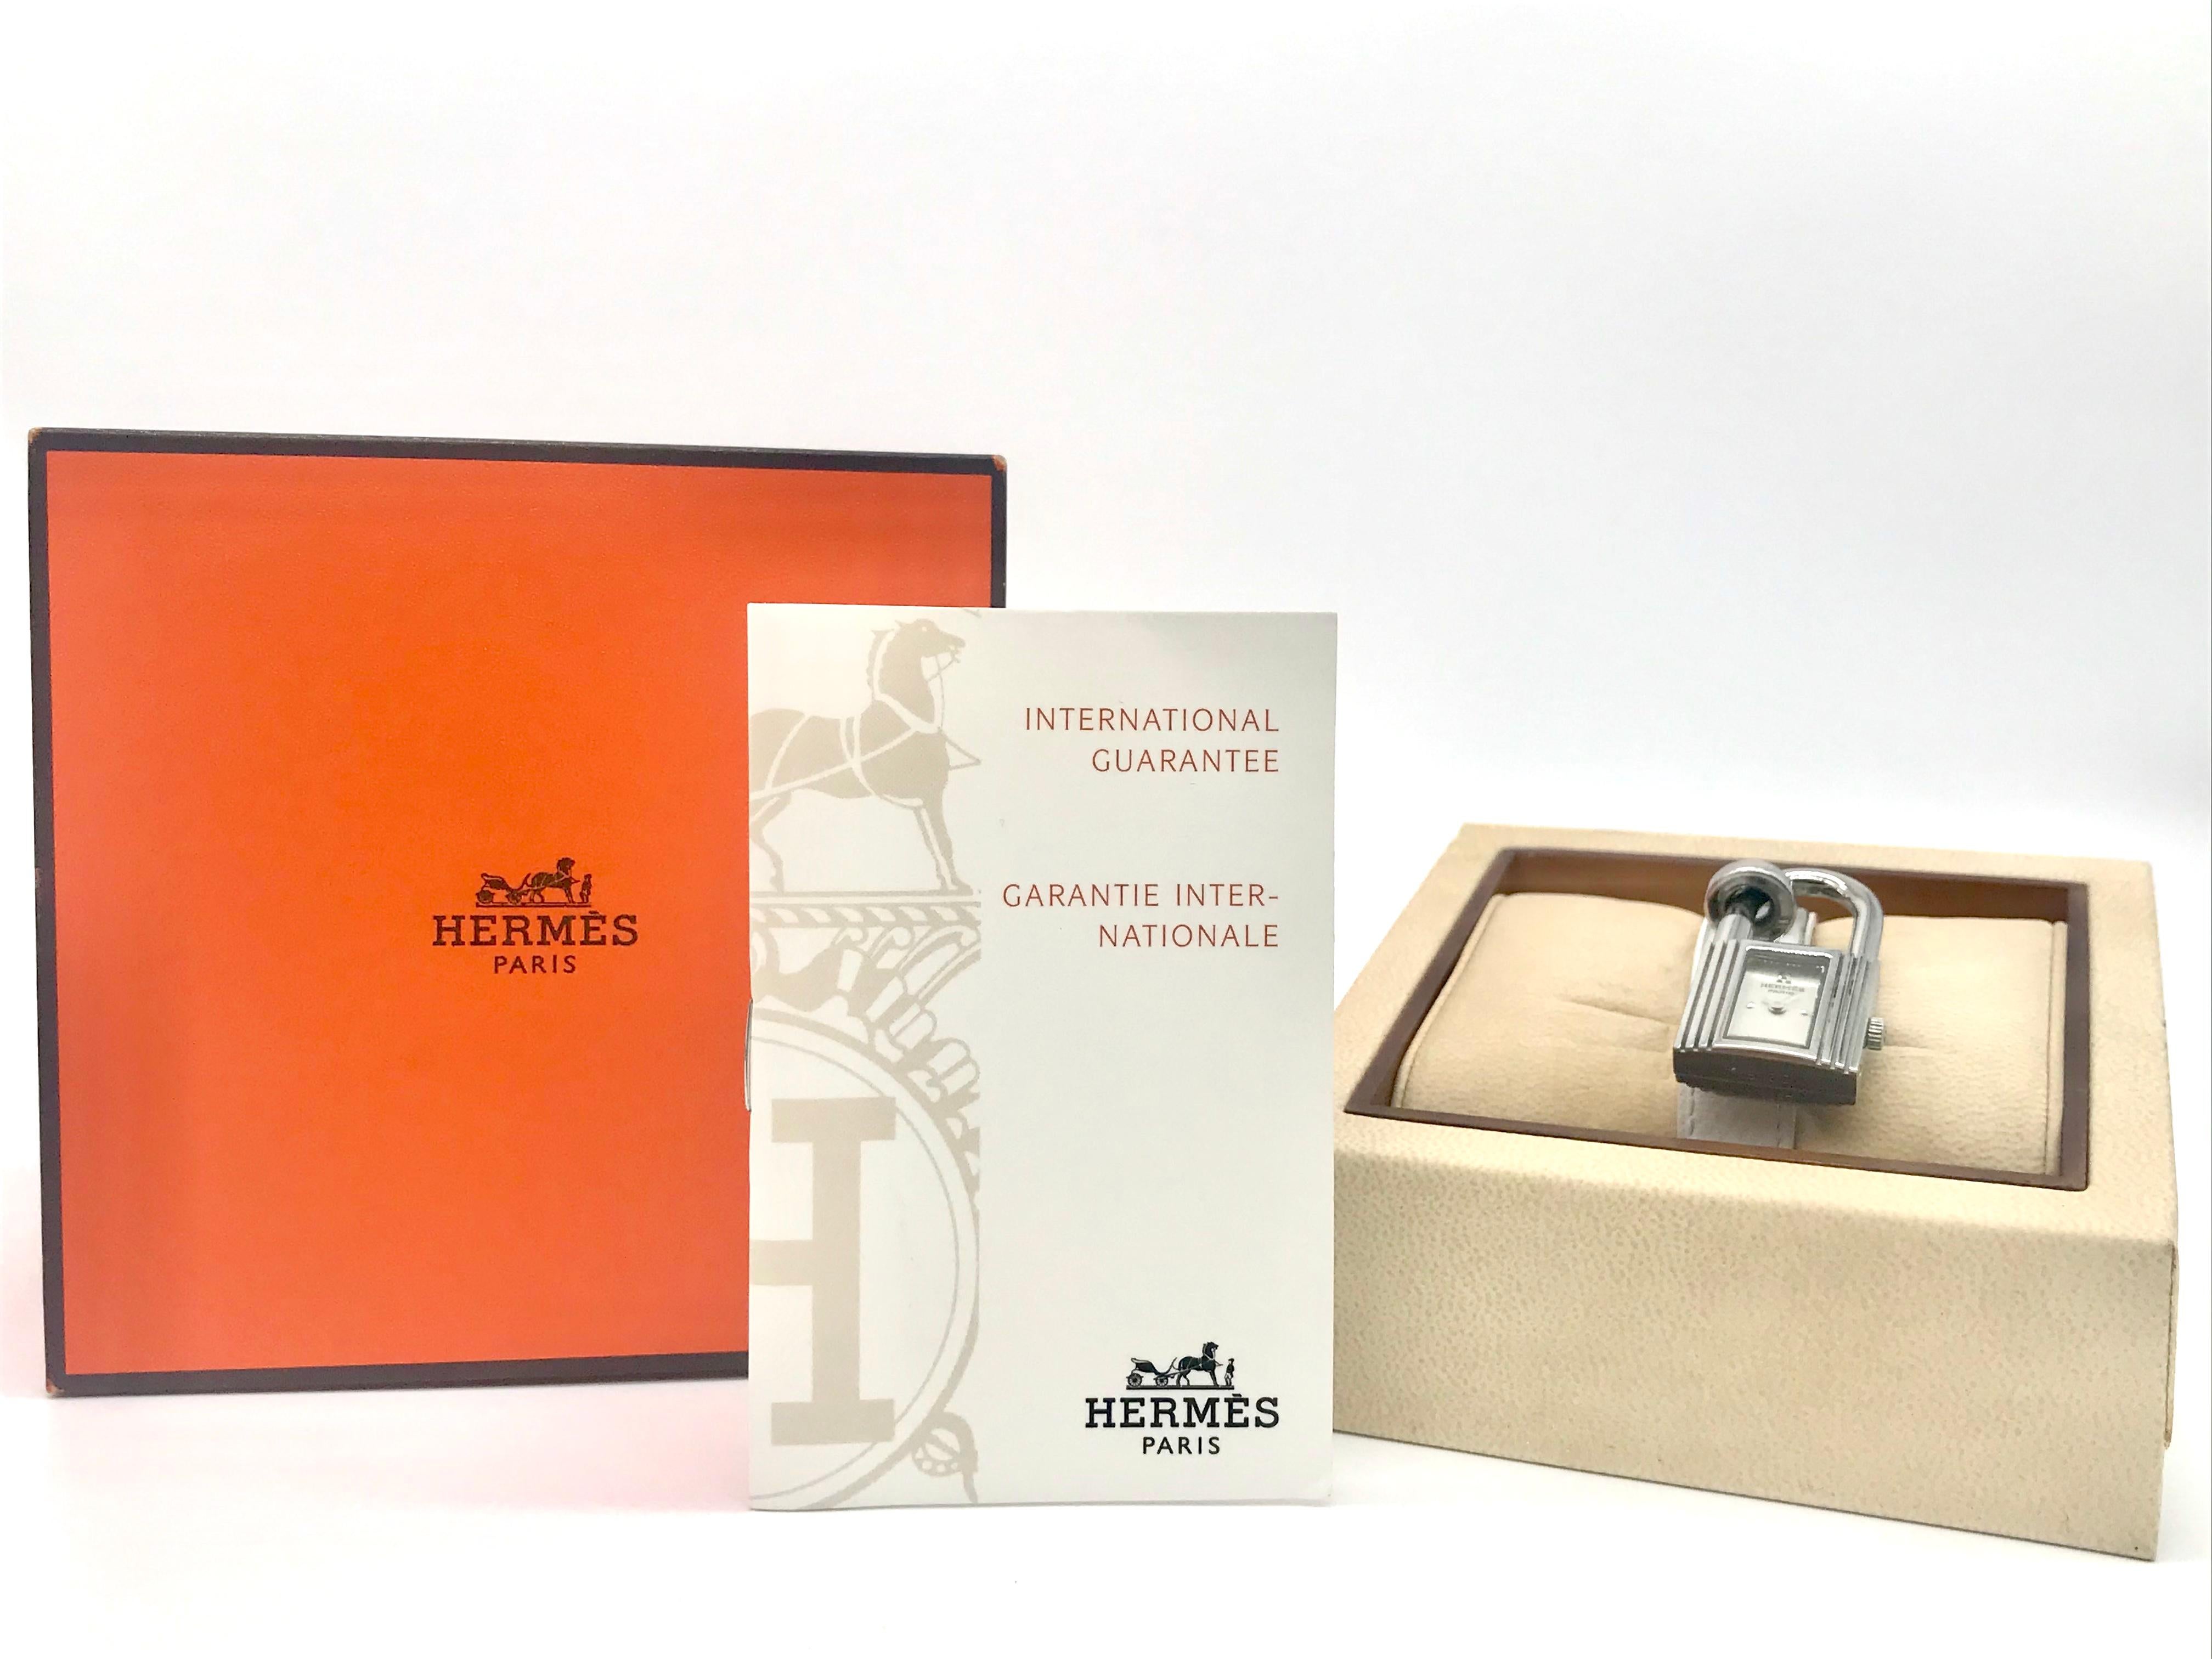 Kelly Hermes Watches
White calfskin Bracelet 
stainless steel
Dimensions of the housing 20 x20 cm 
With certificat and Original Box 
Kelly watch with padlock shape on a moblile brass ring, index 4, quartz movement, on buckle adjustable buckle